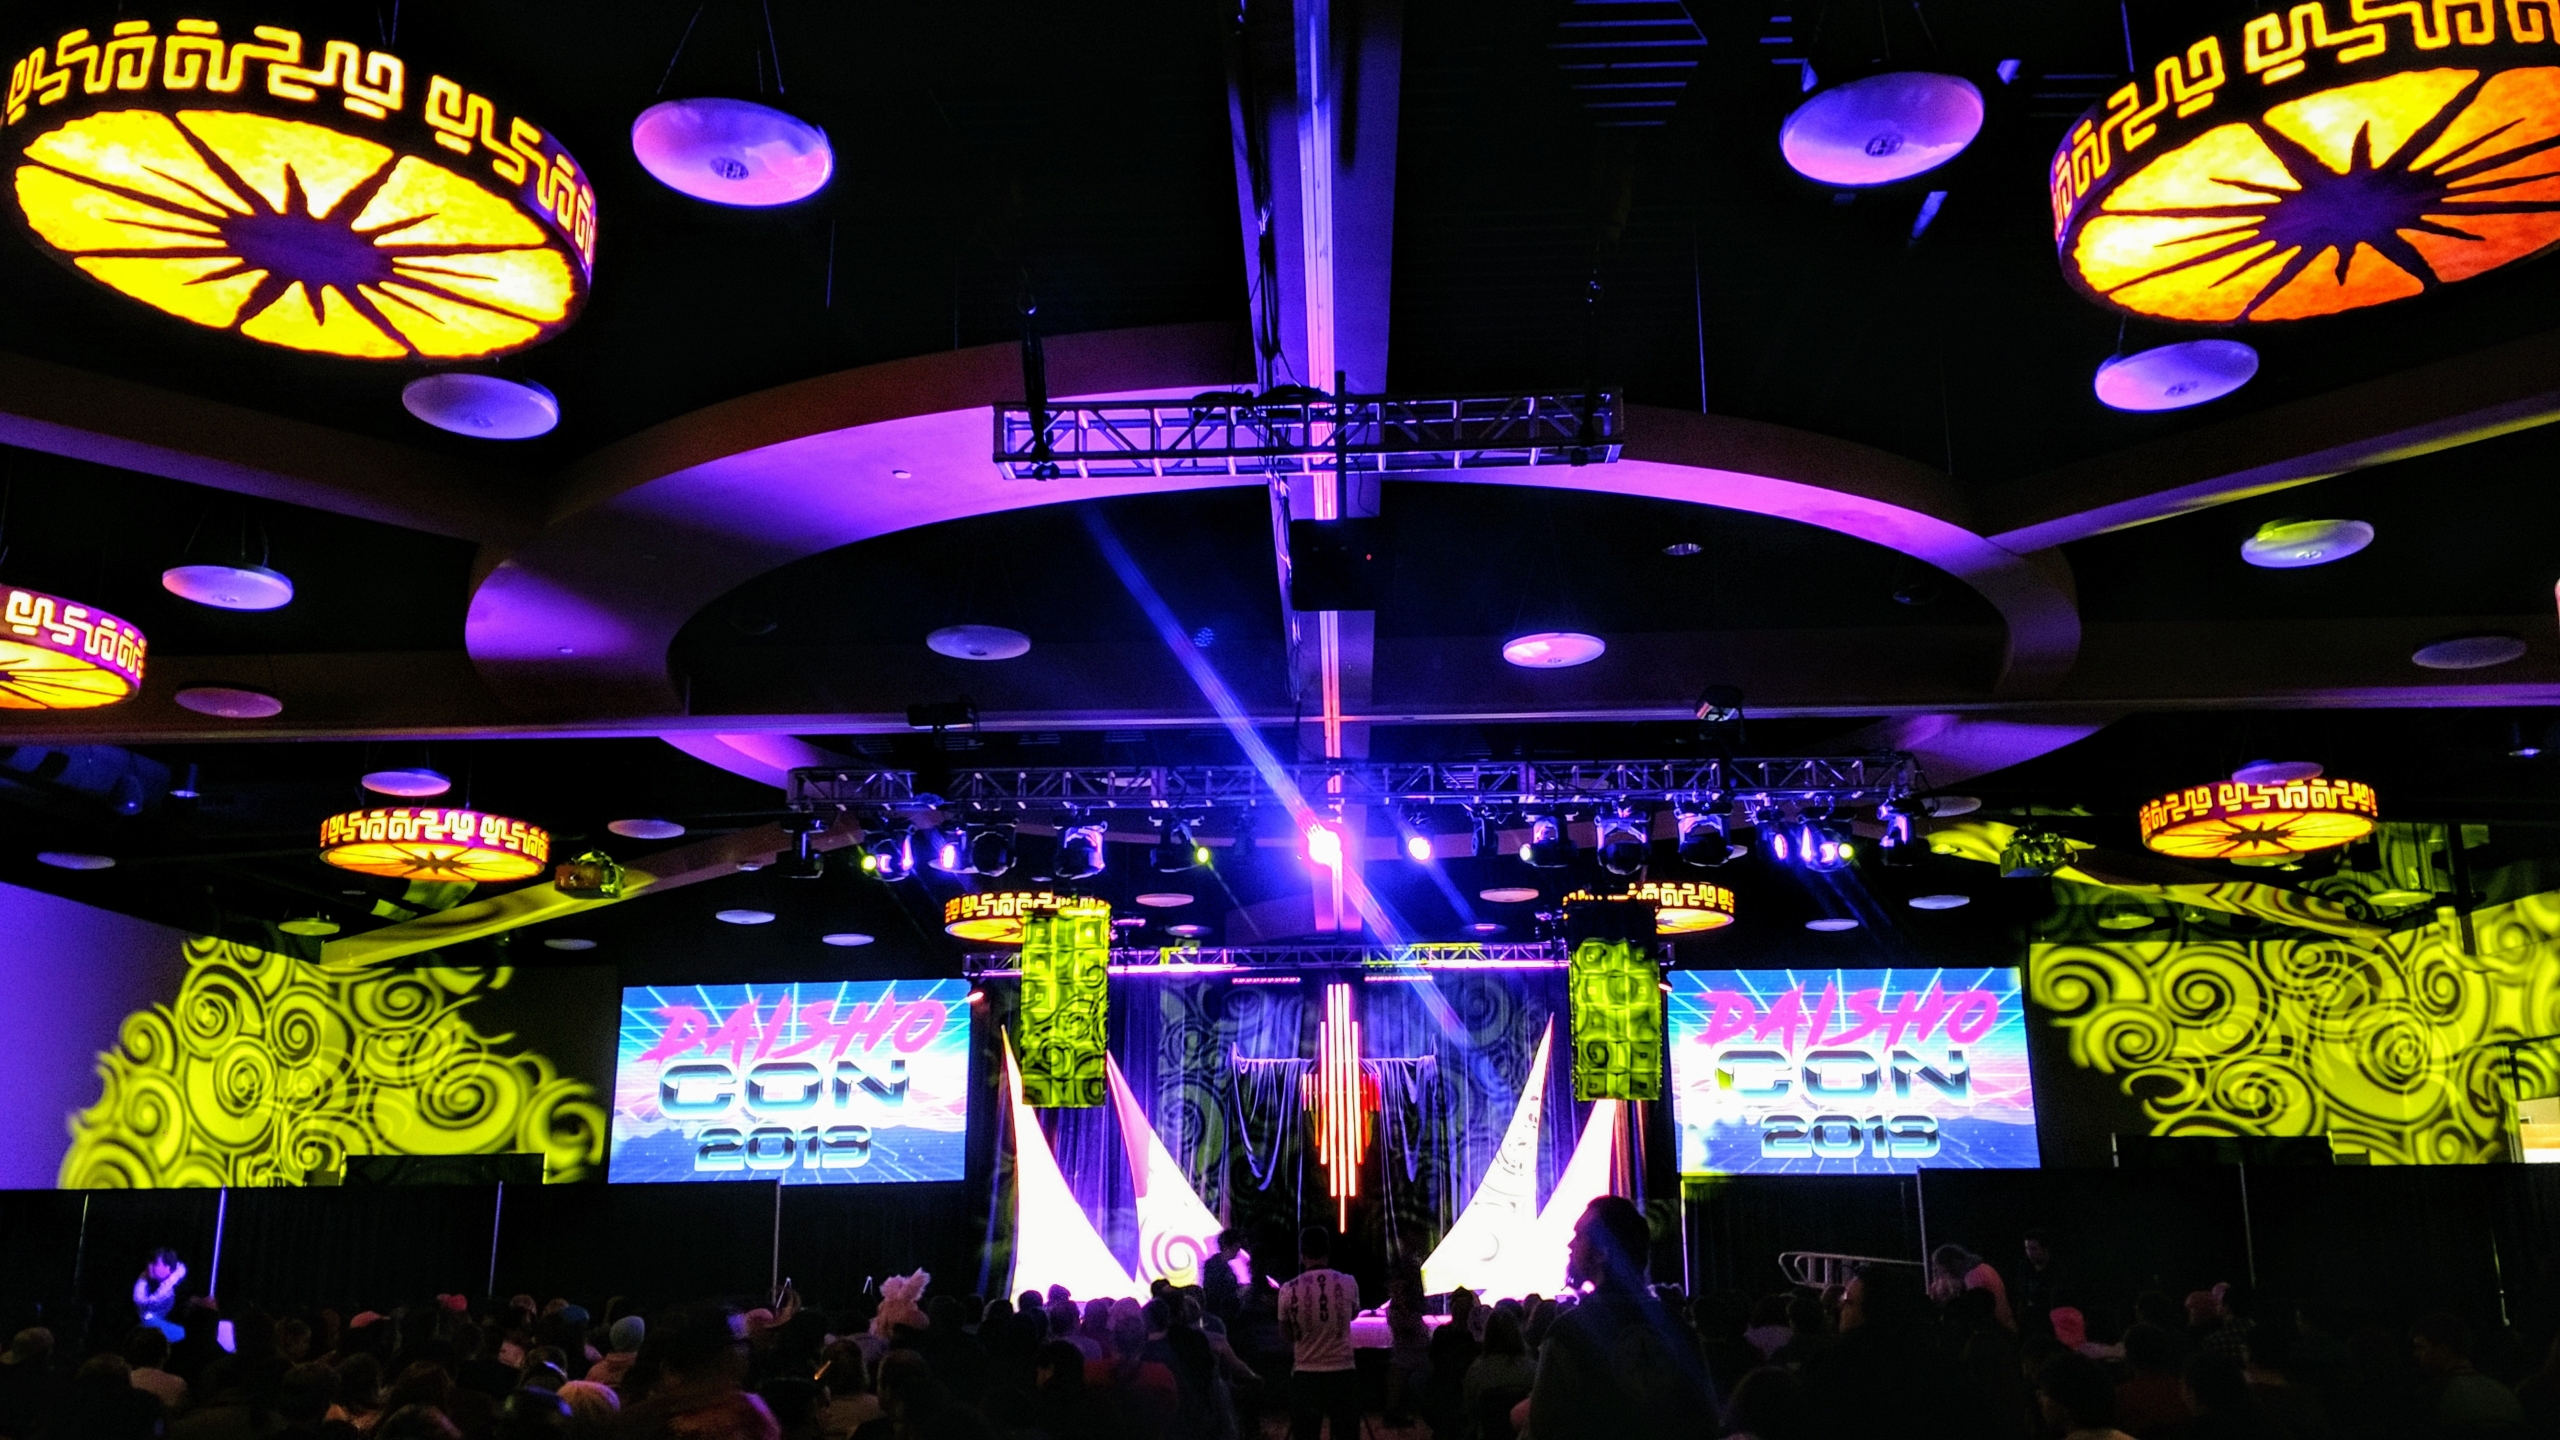 large event with exciting lighting and large screens